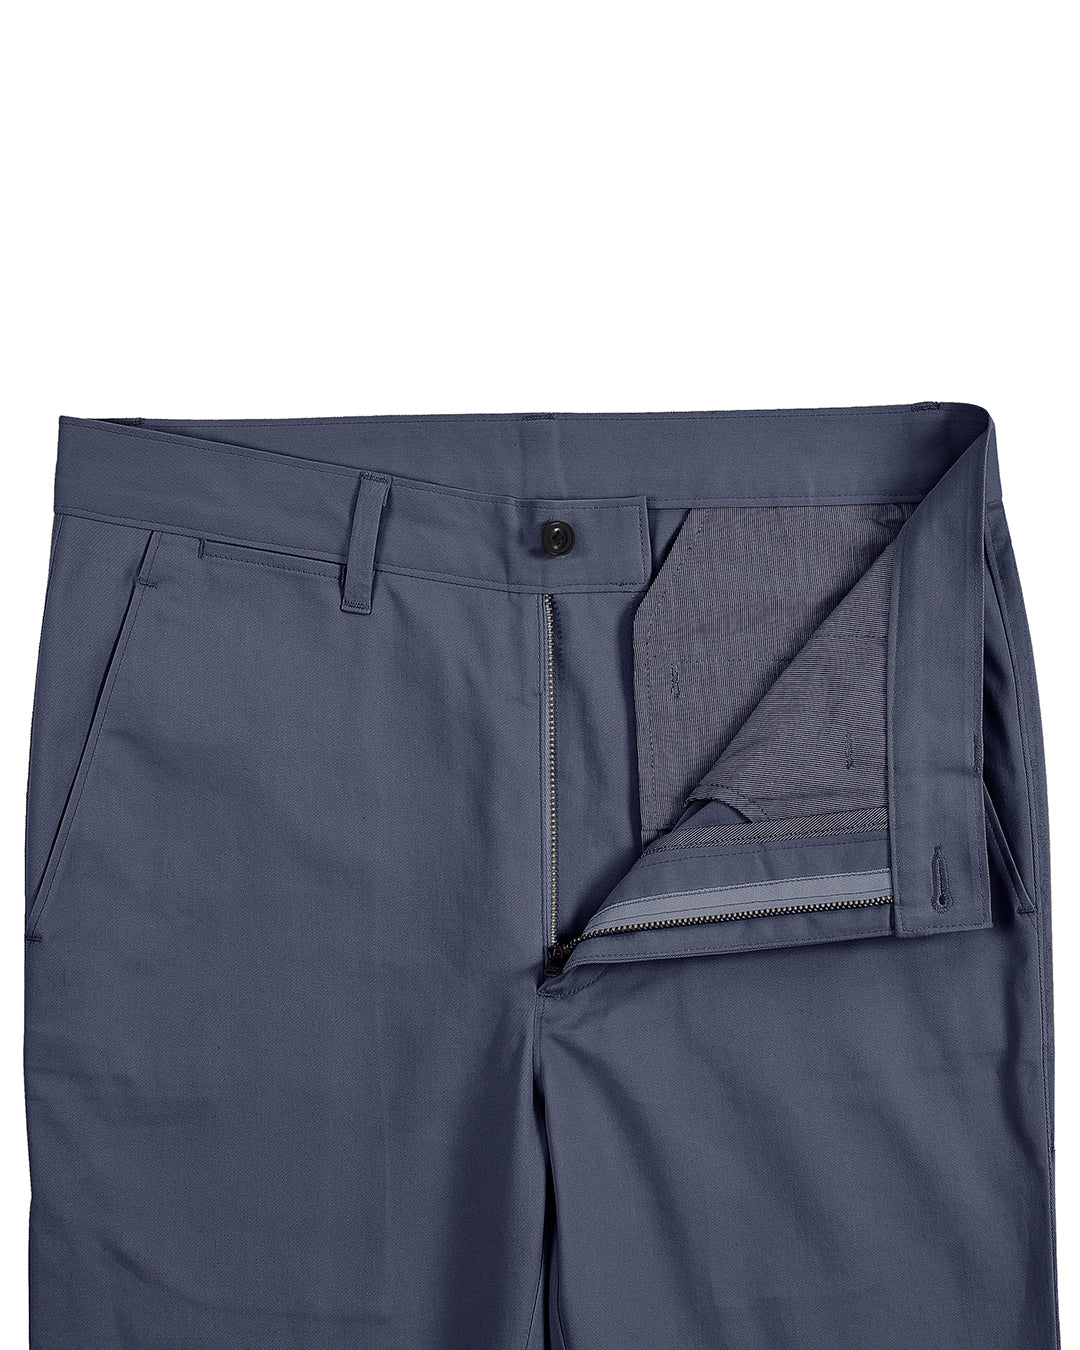 Front open view of custom Genoa Chino pants for men by Luxire in grey